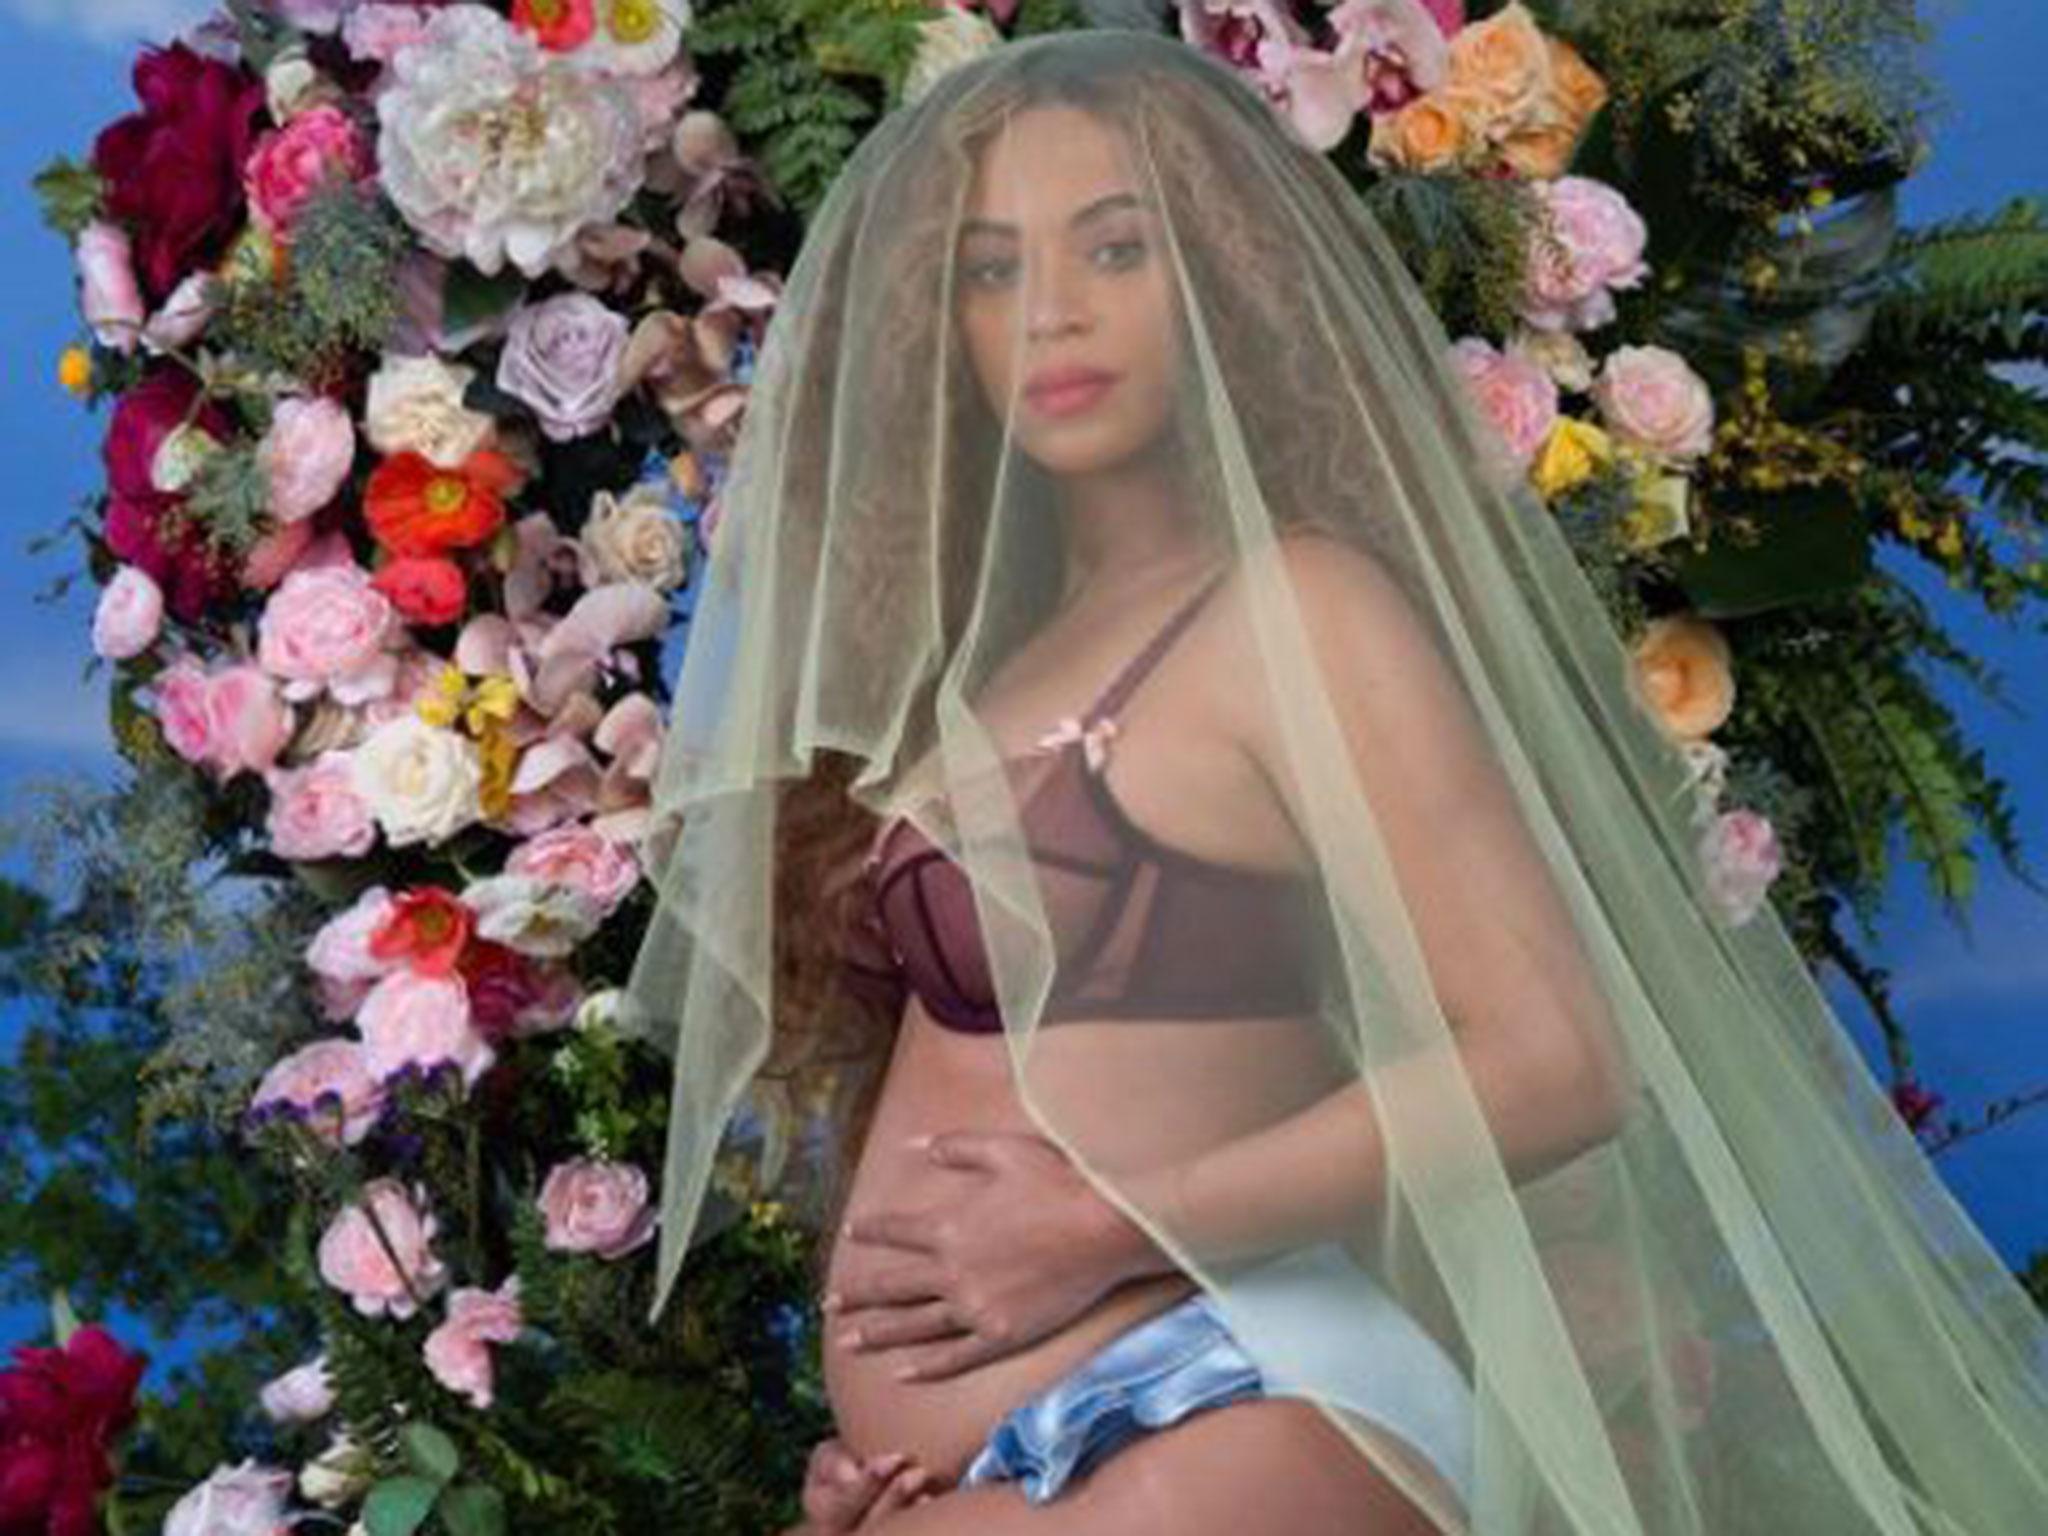 Beyonce and her husband Jay Z are already parents to five-year-old daughter Blue Ivy